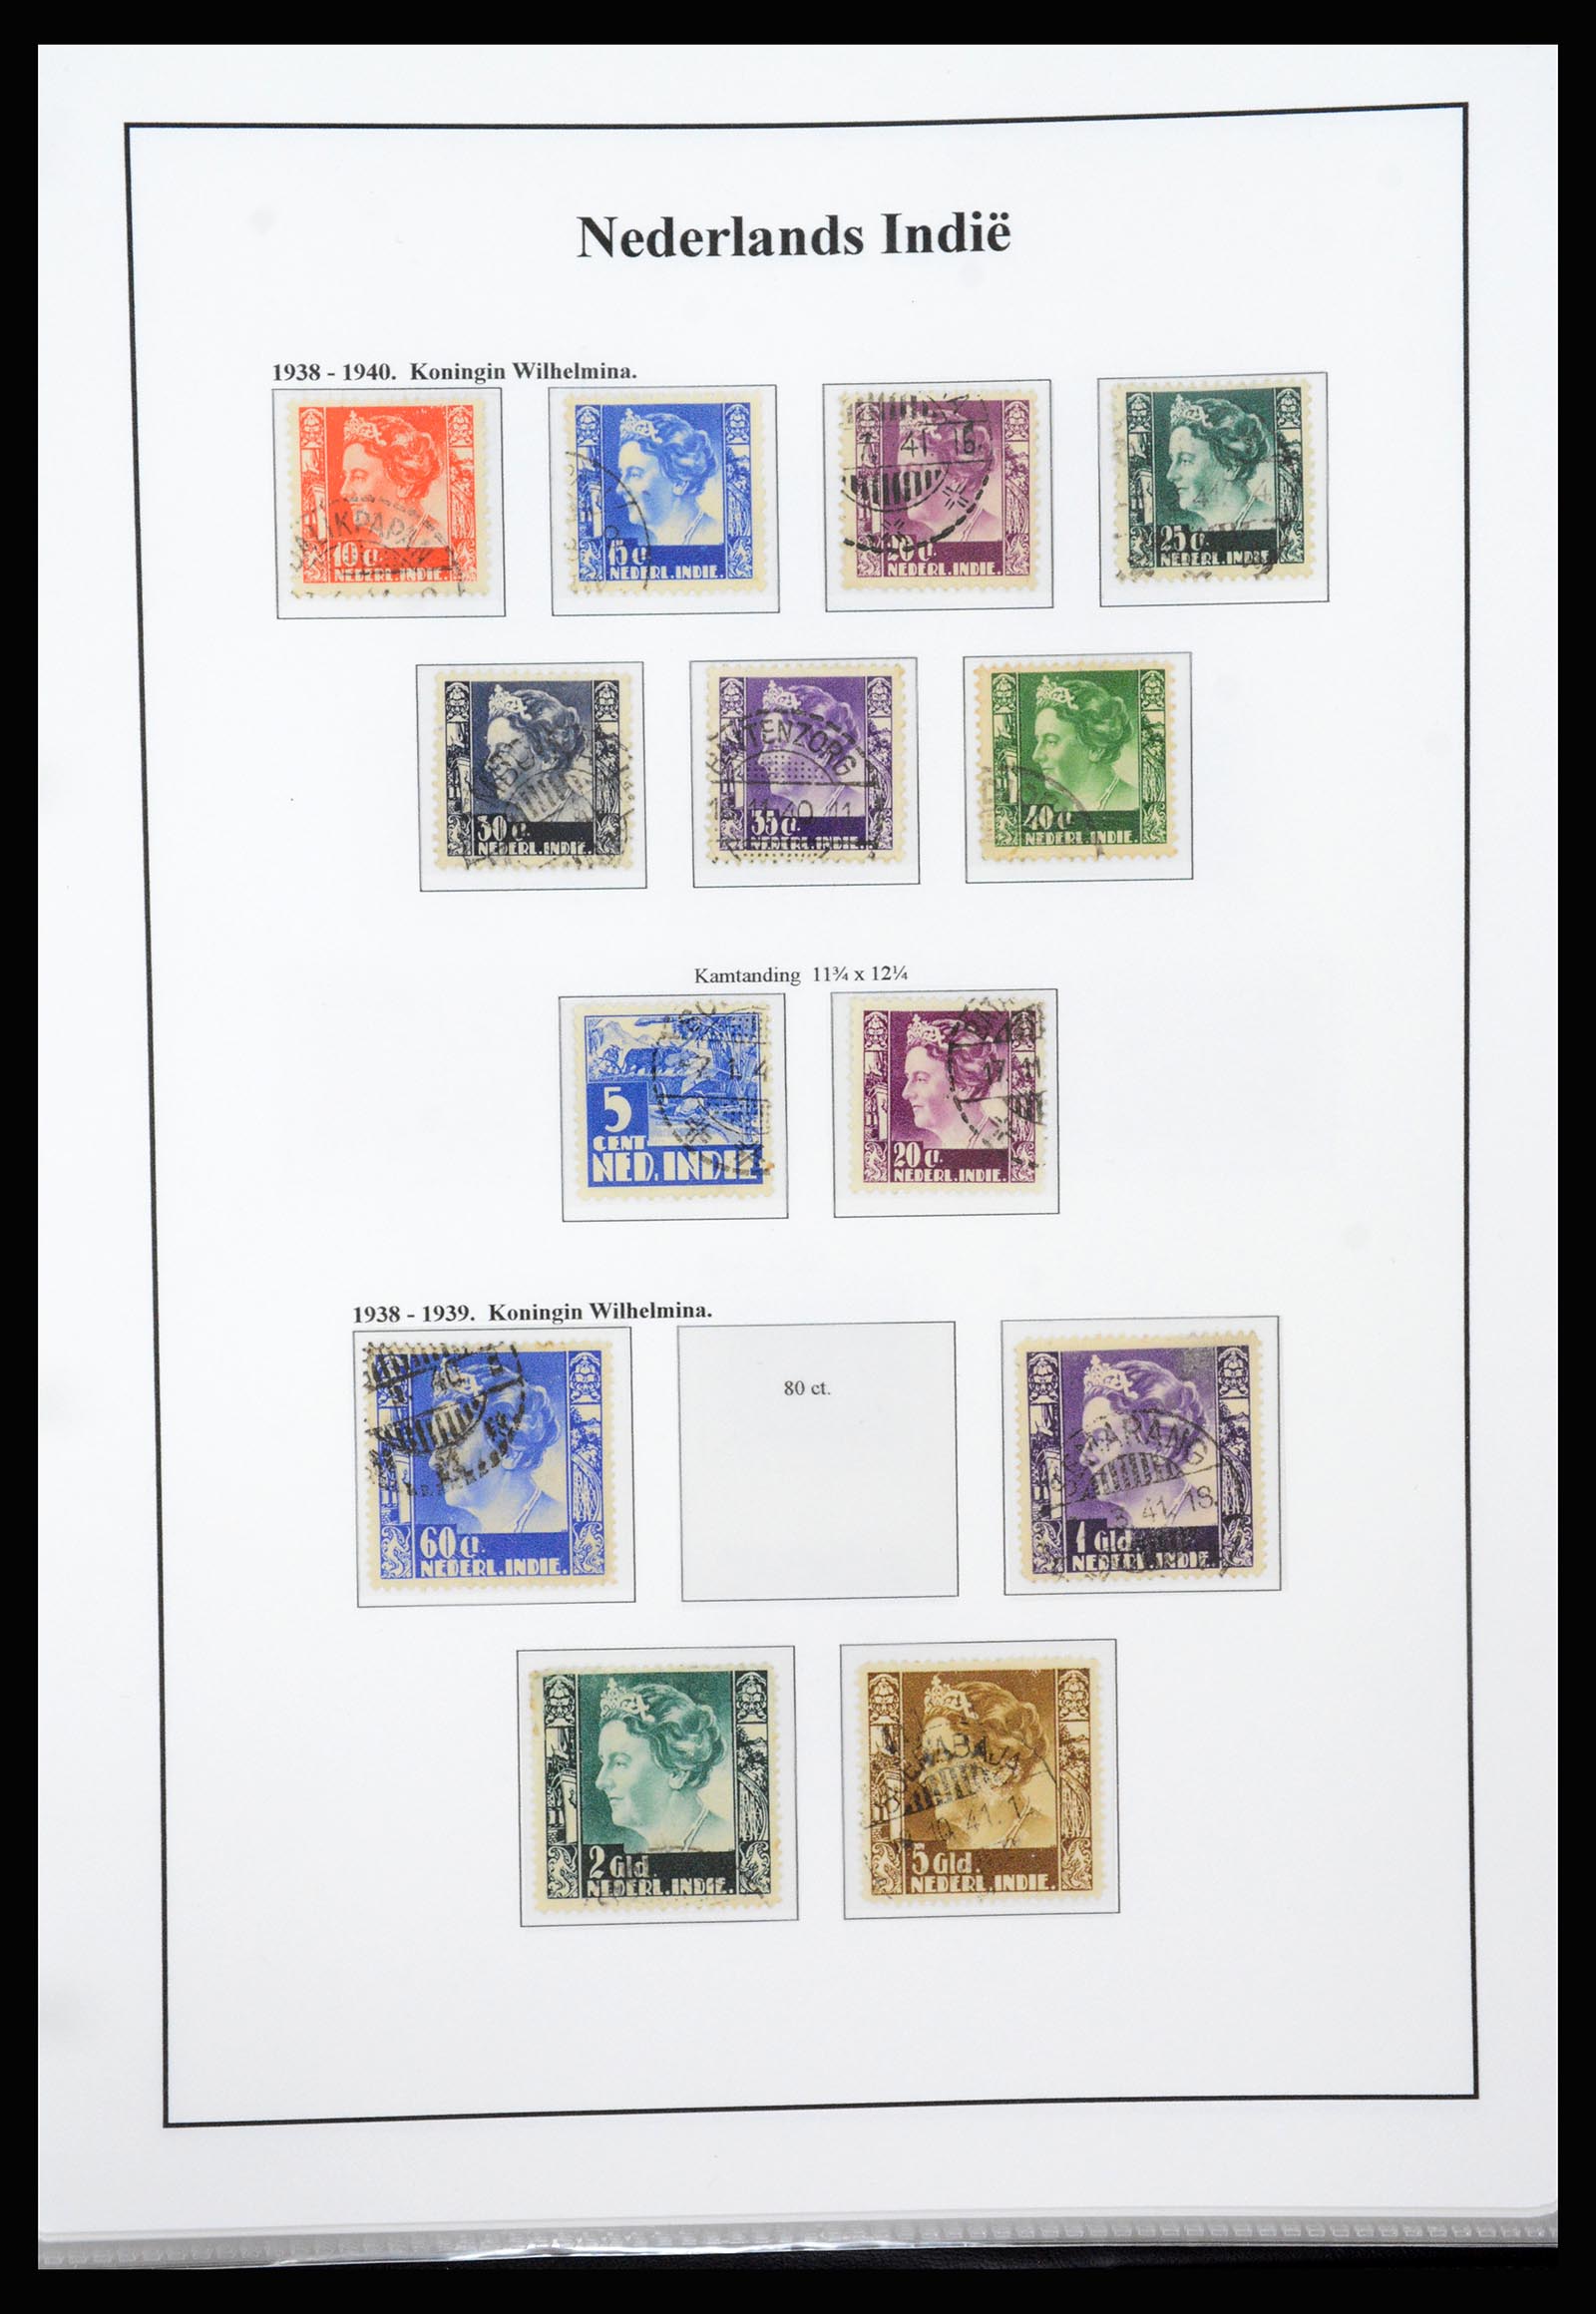 37247 021 - Stamp collection 37247 Dutch east Indies 1864-1949.